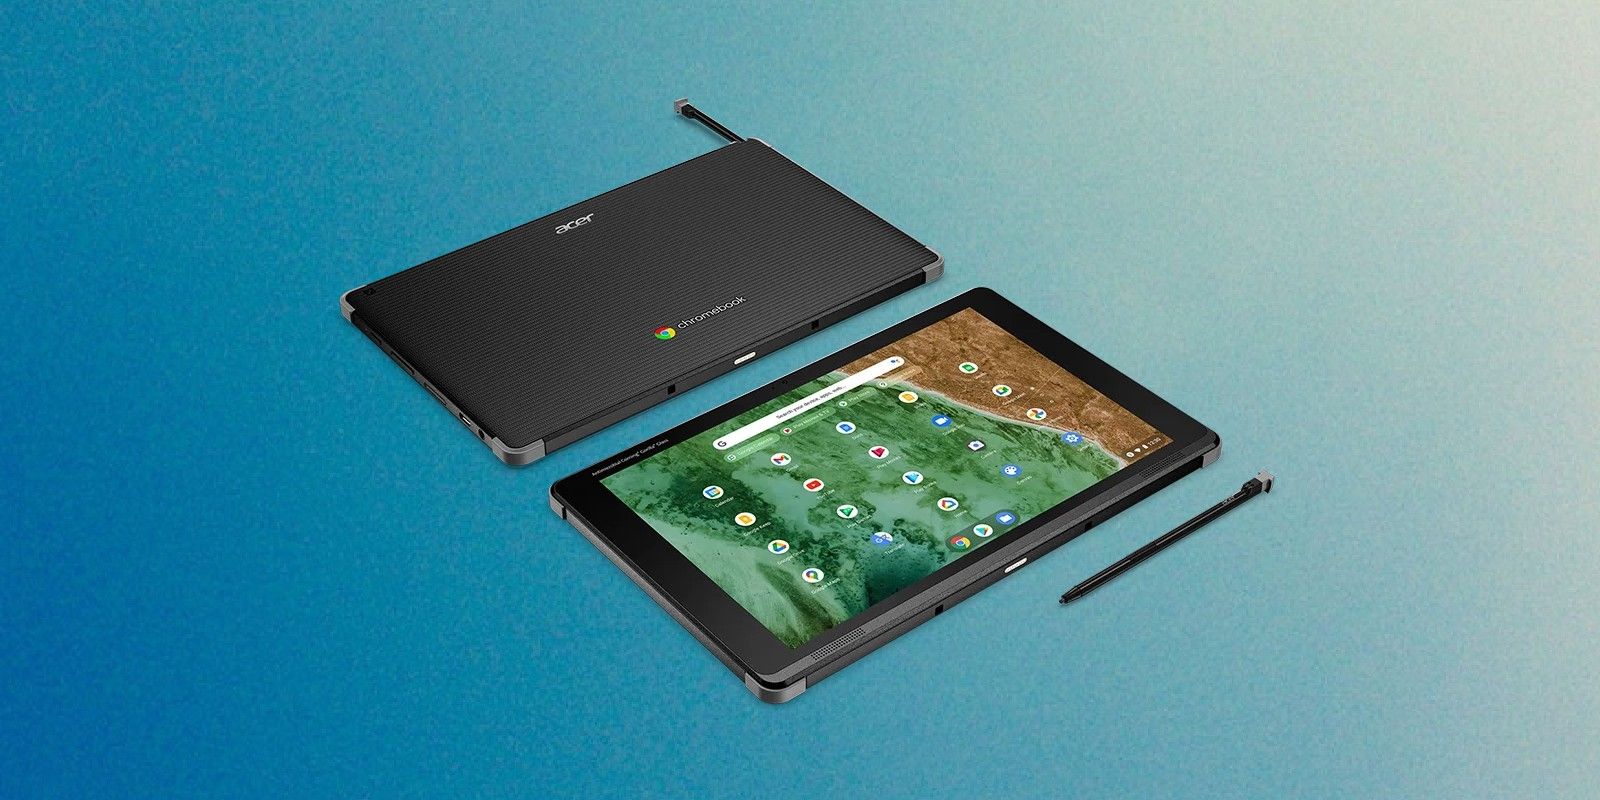 The Acer Chromebook Tab 510 has a built-in stylus